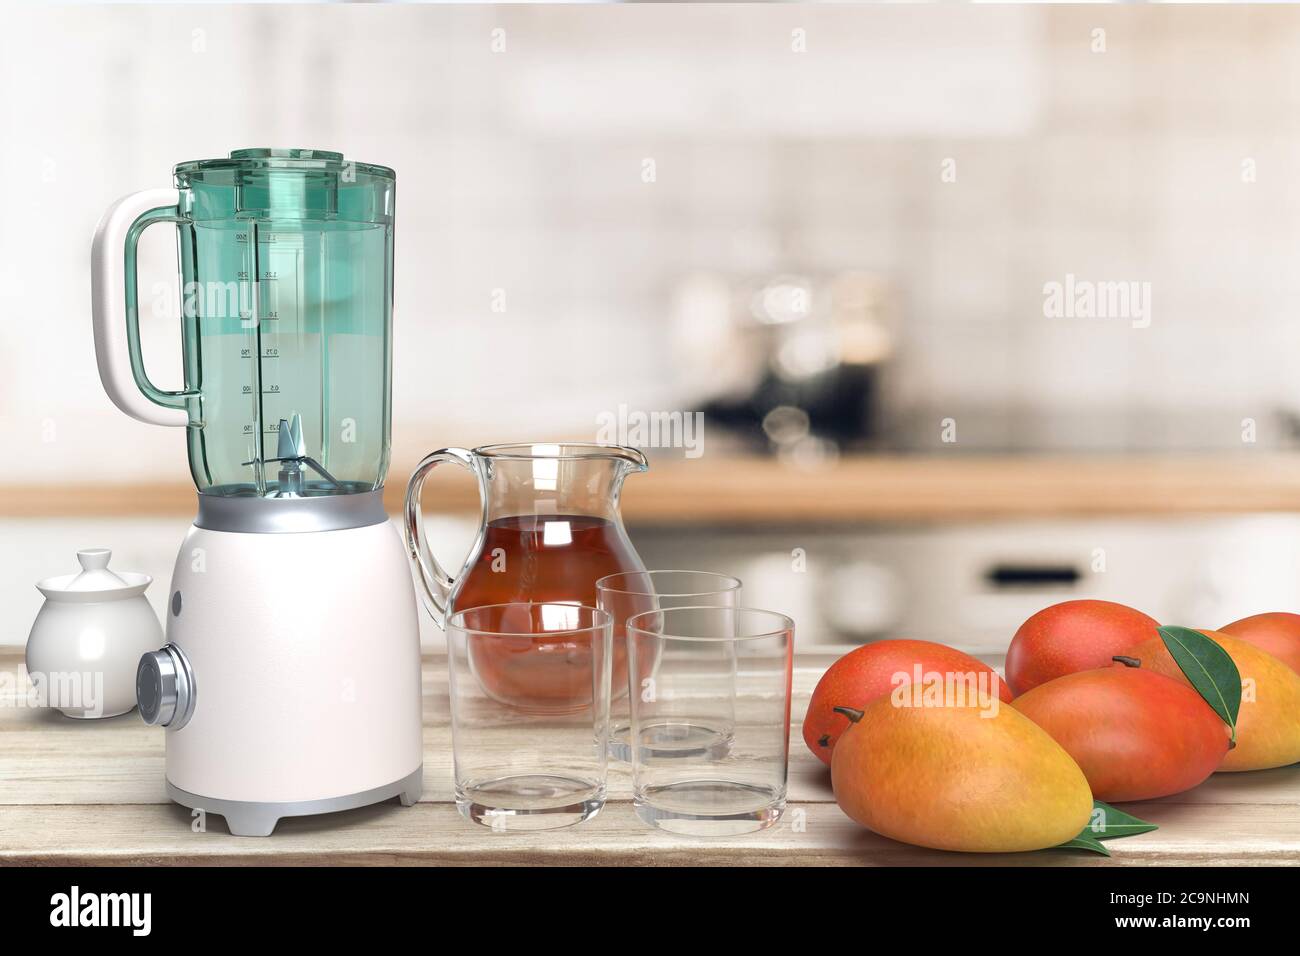 https://c8.alamy.com/comp/2C9NHMN/realistic-looking-mixer-grinder-glass-container-and-ripe-mangos-at-wooden-table-top-in-blurred-kitchen-interior-background-3d-rendering-2C9NHMN.jpg